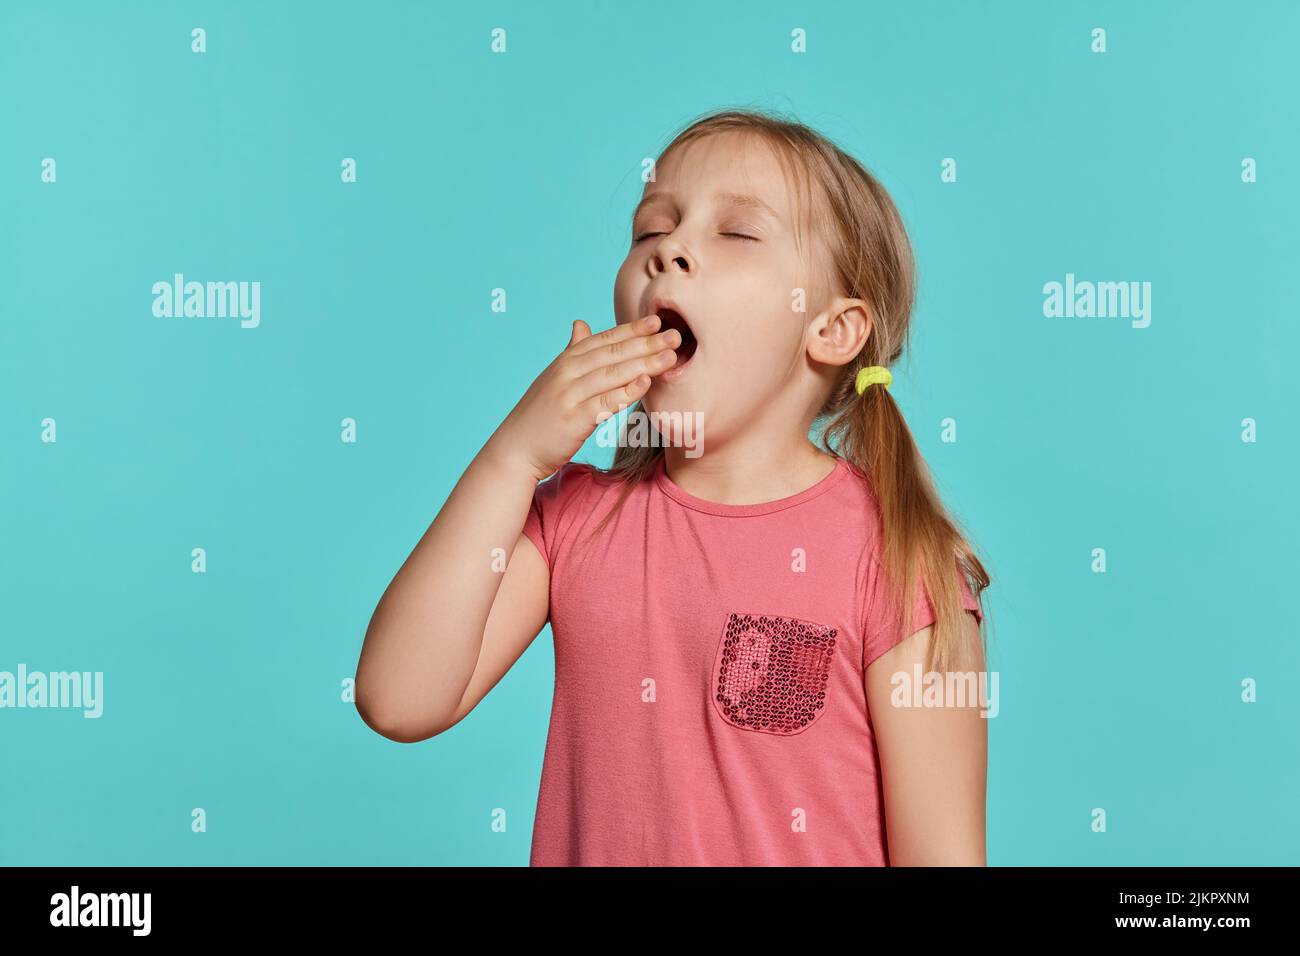 Close-up shot of beautiful blonde little girl in a pink dress posing against a blue background. Stock Photo